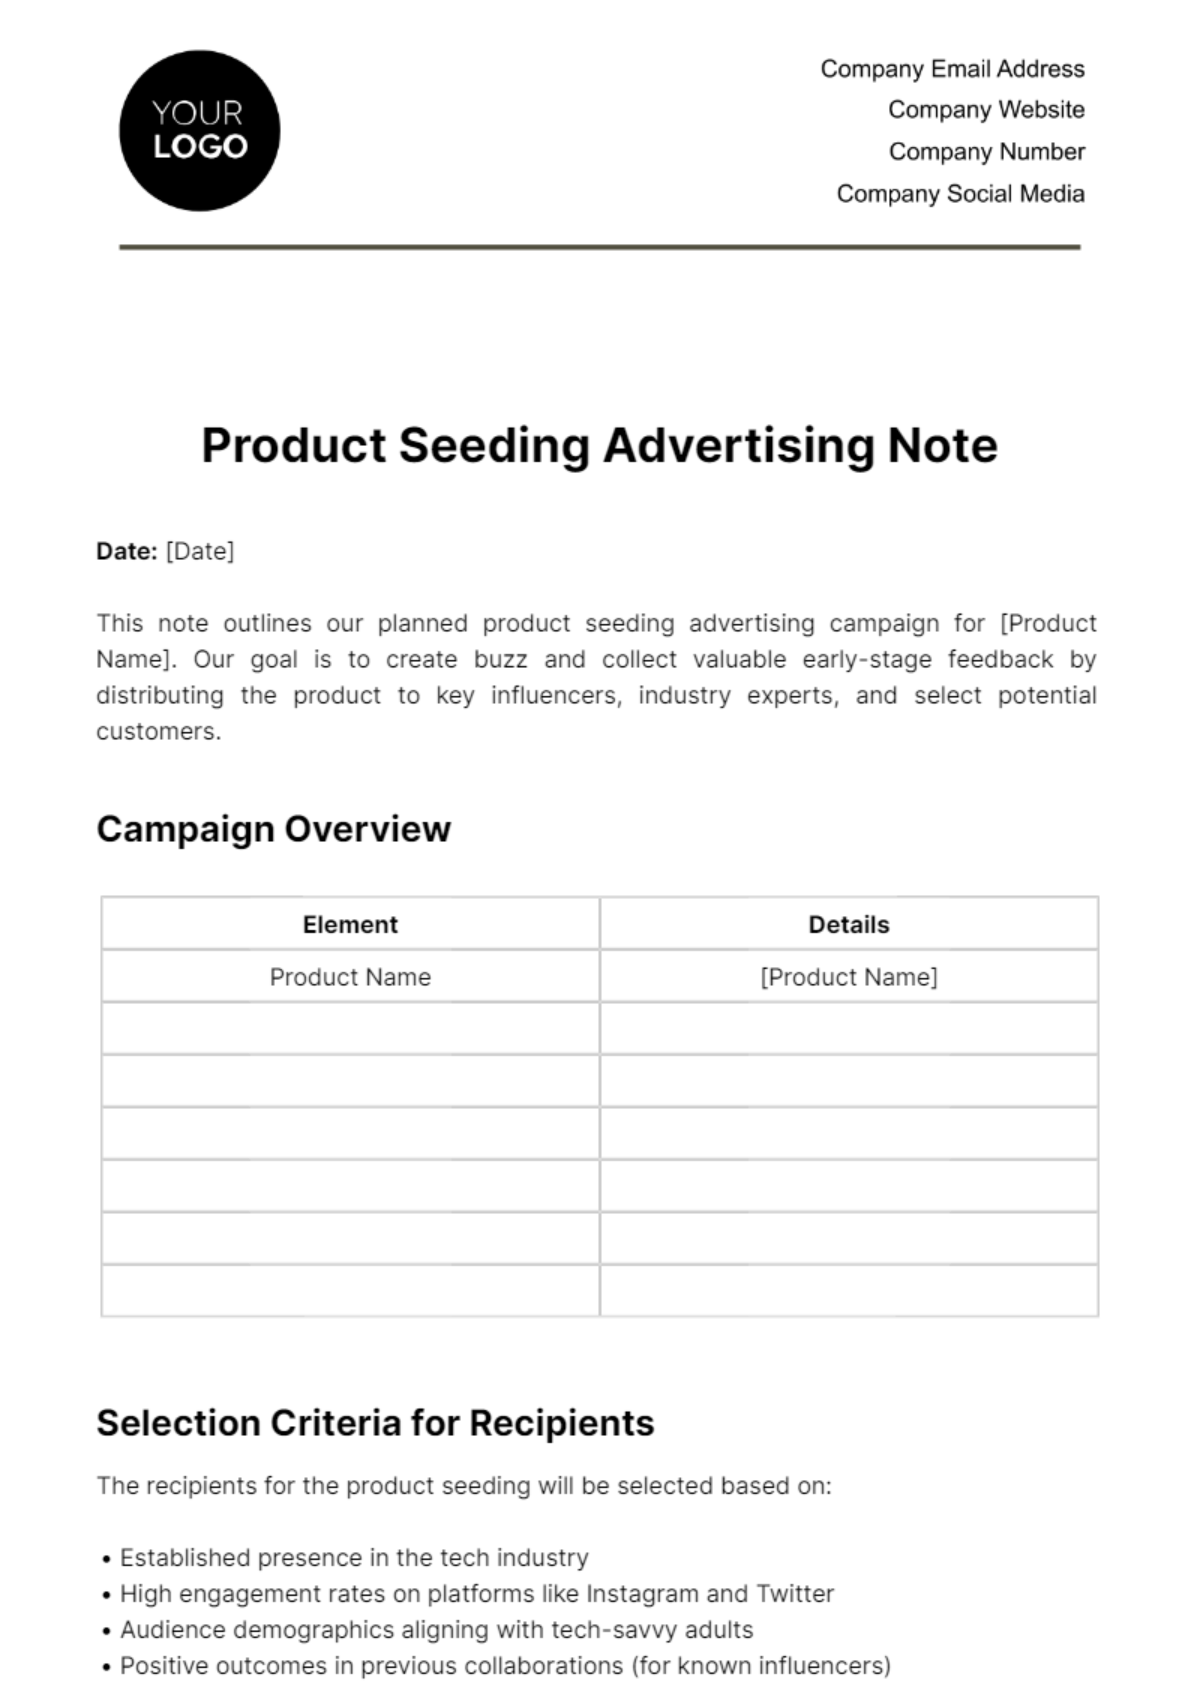 Product Seeding Advertising Note Template